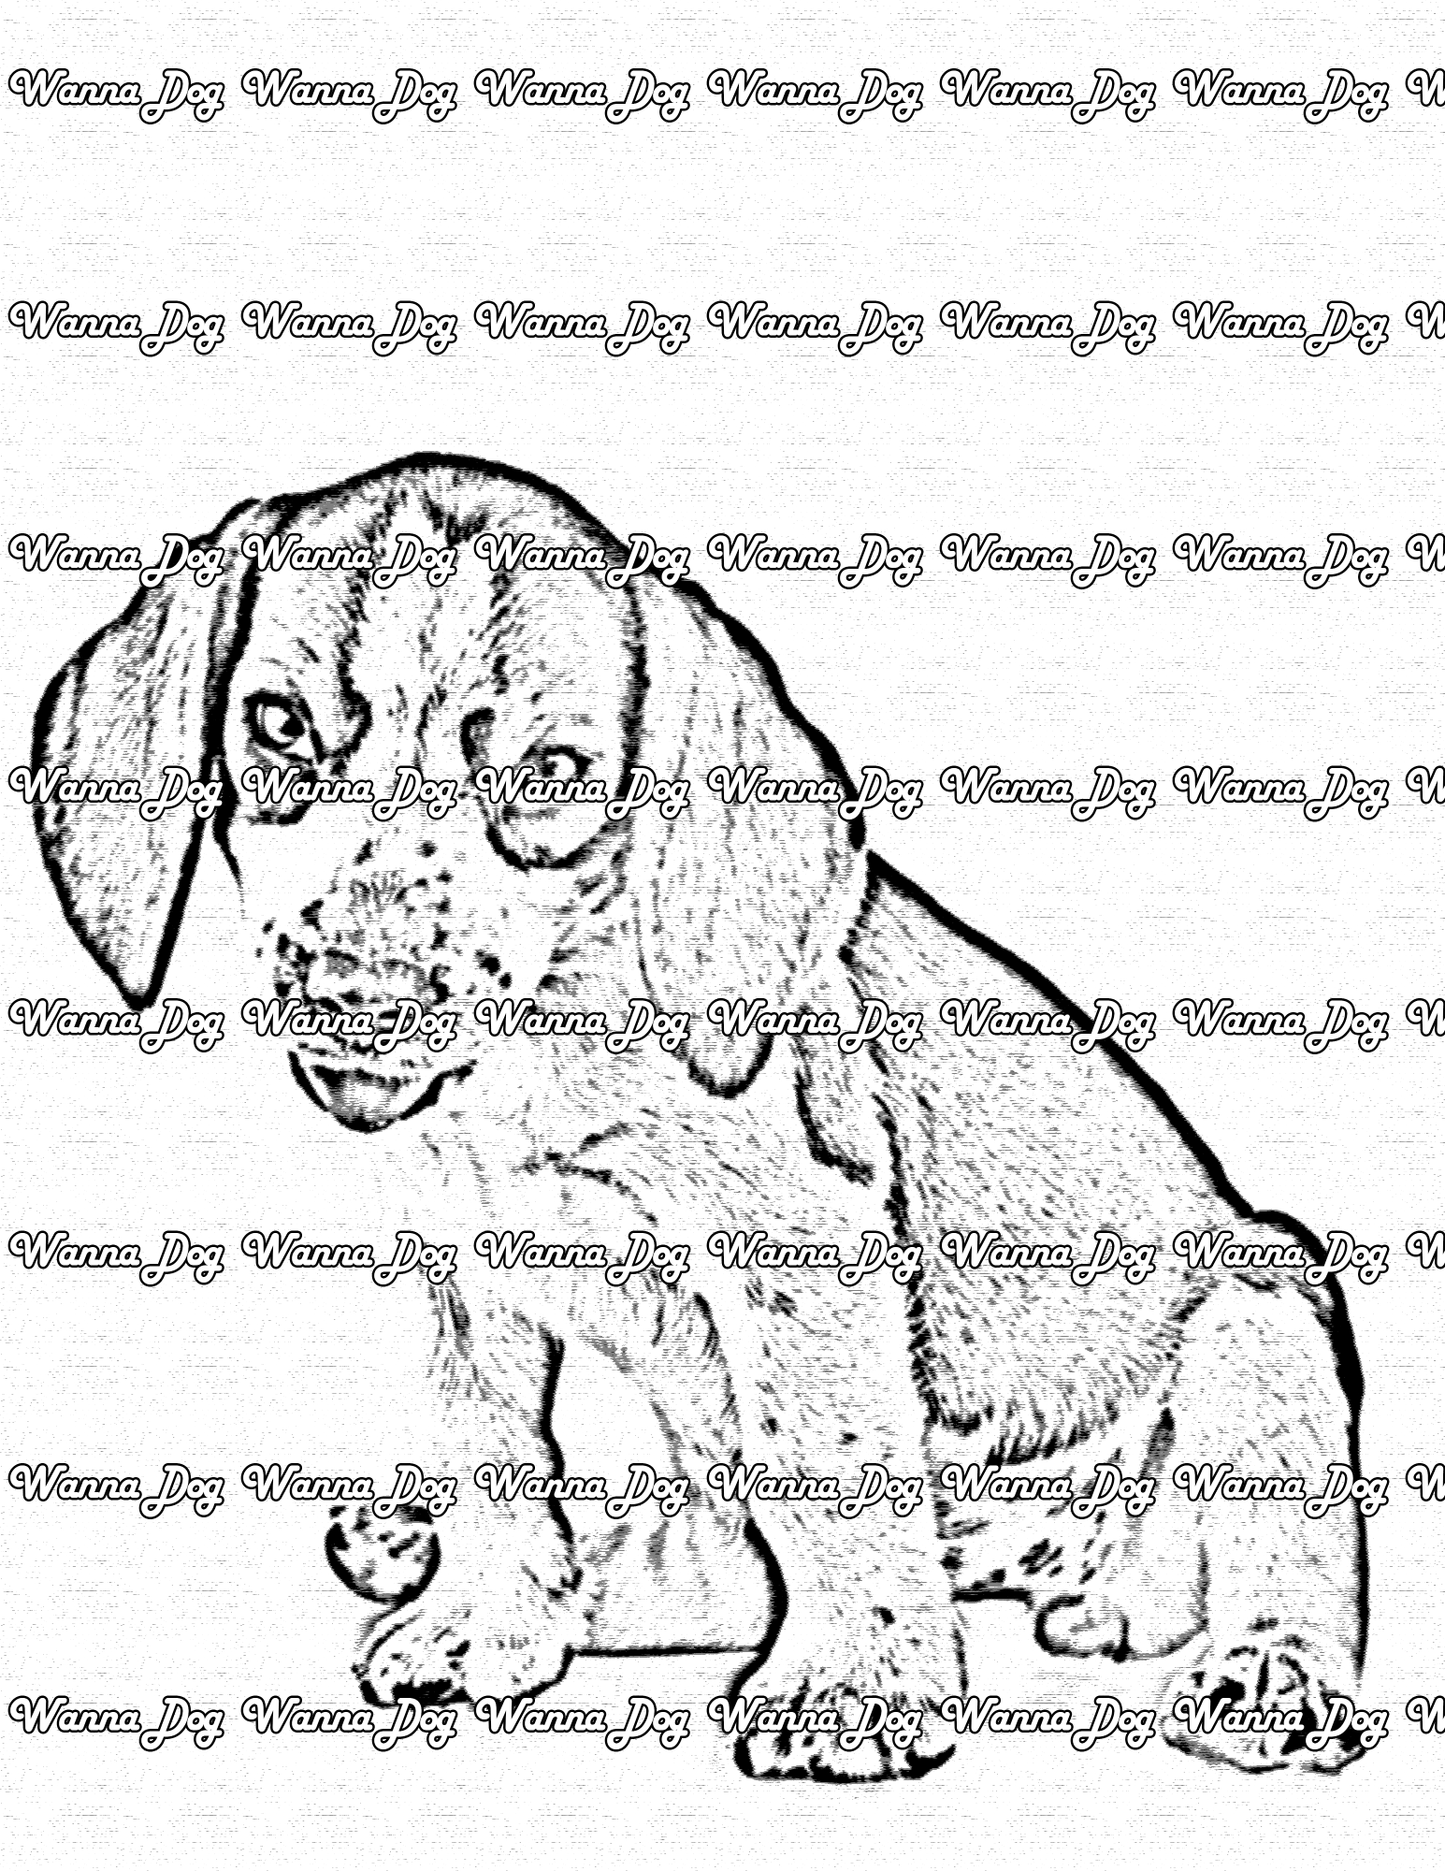 Beagle Puppy Coloring Page of a Beagle Puppy with their tongue out